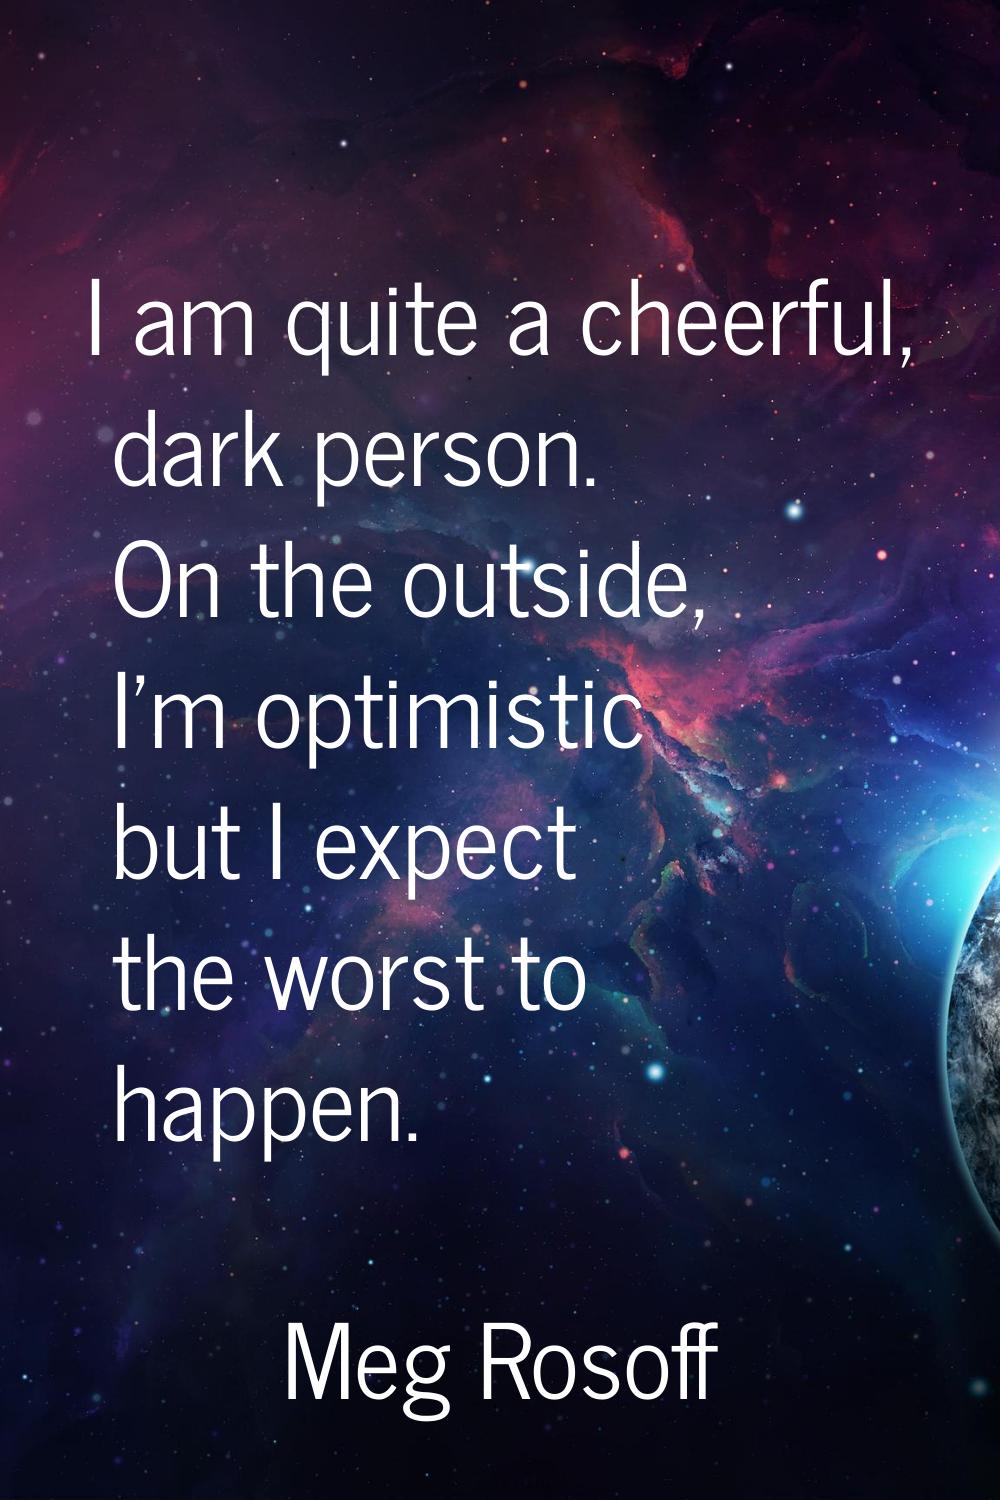 I am quite a cheerful, dark person. On the outside, I'm optimistic but I expect the worst to happen